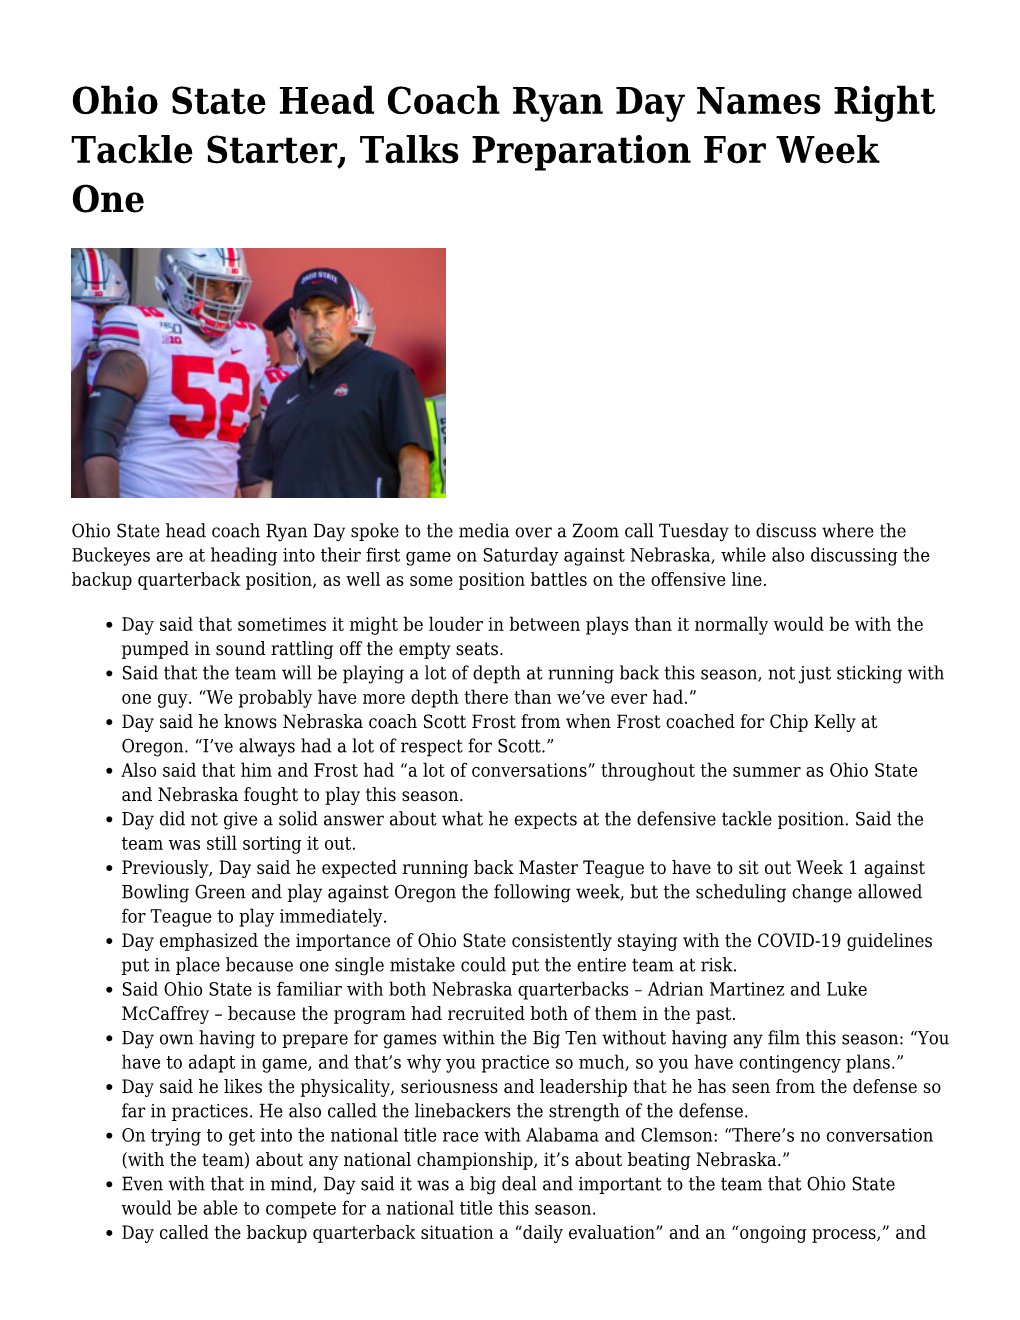 Ohio State Head Coach Ryan Day Names Right Tackle Starter, Talks Preparation for Week One